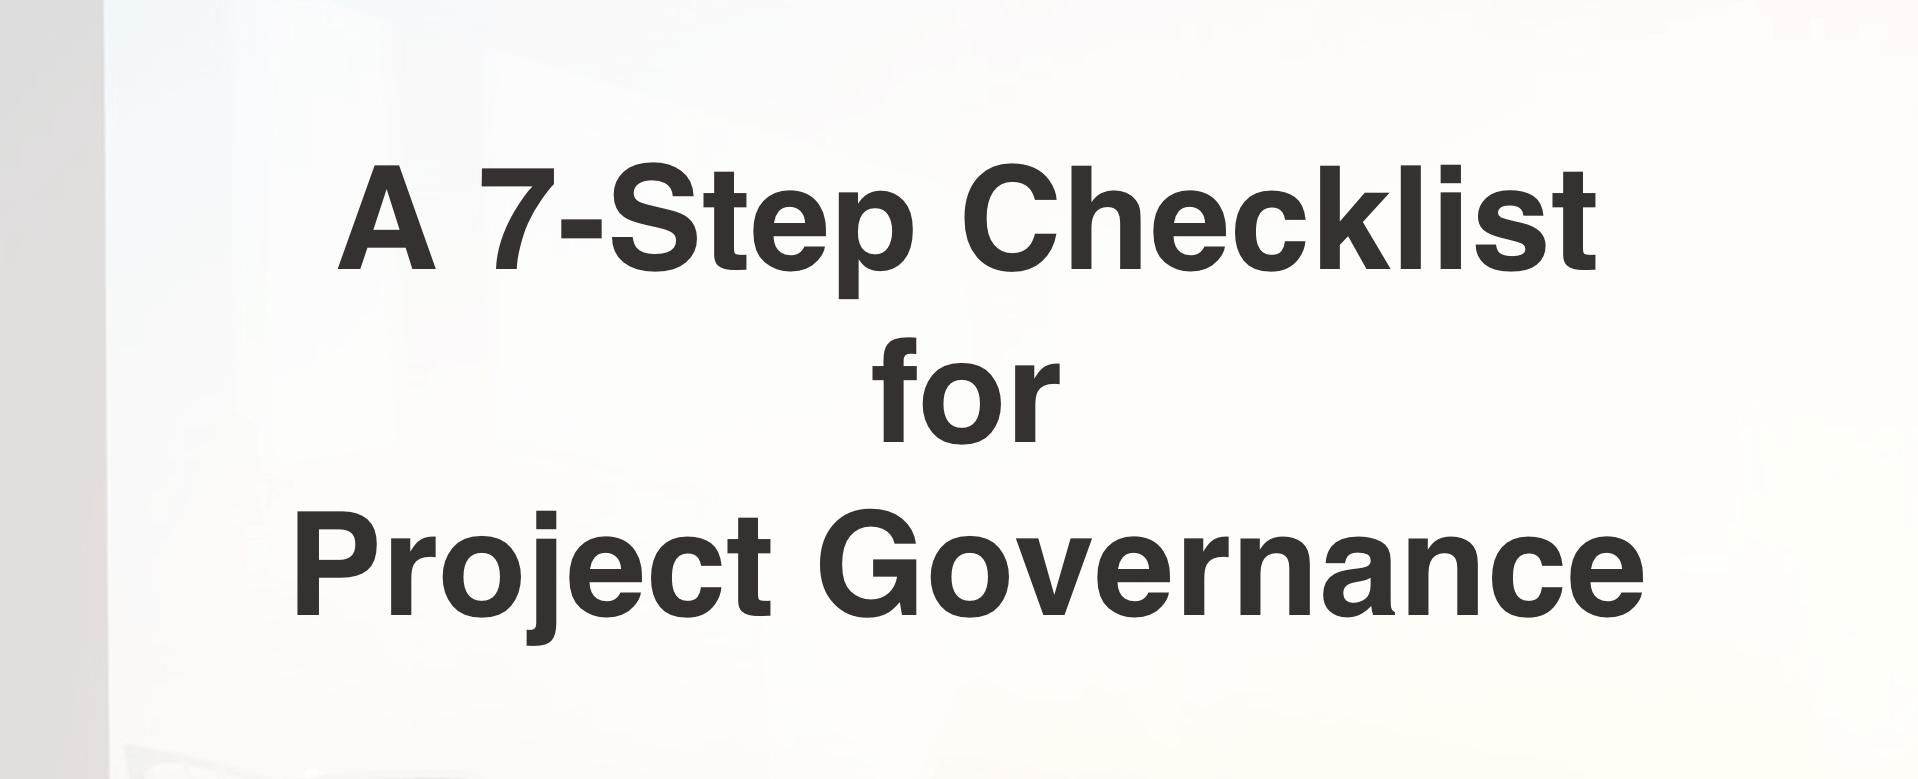 A 7-Step Checklist for Project Governance